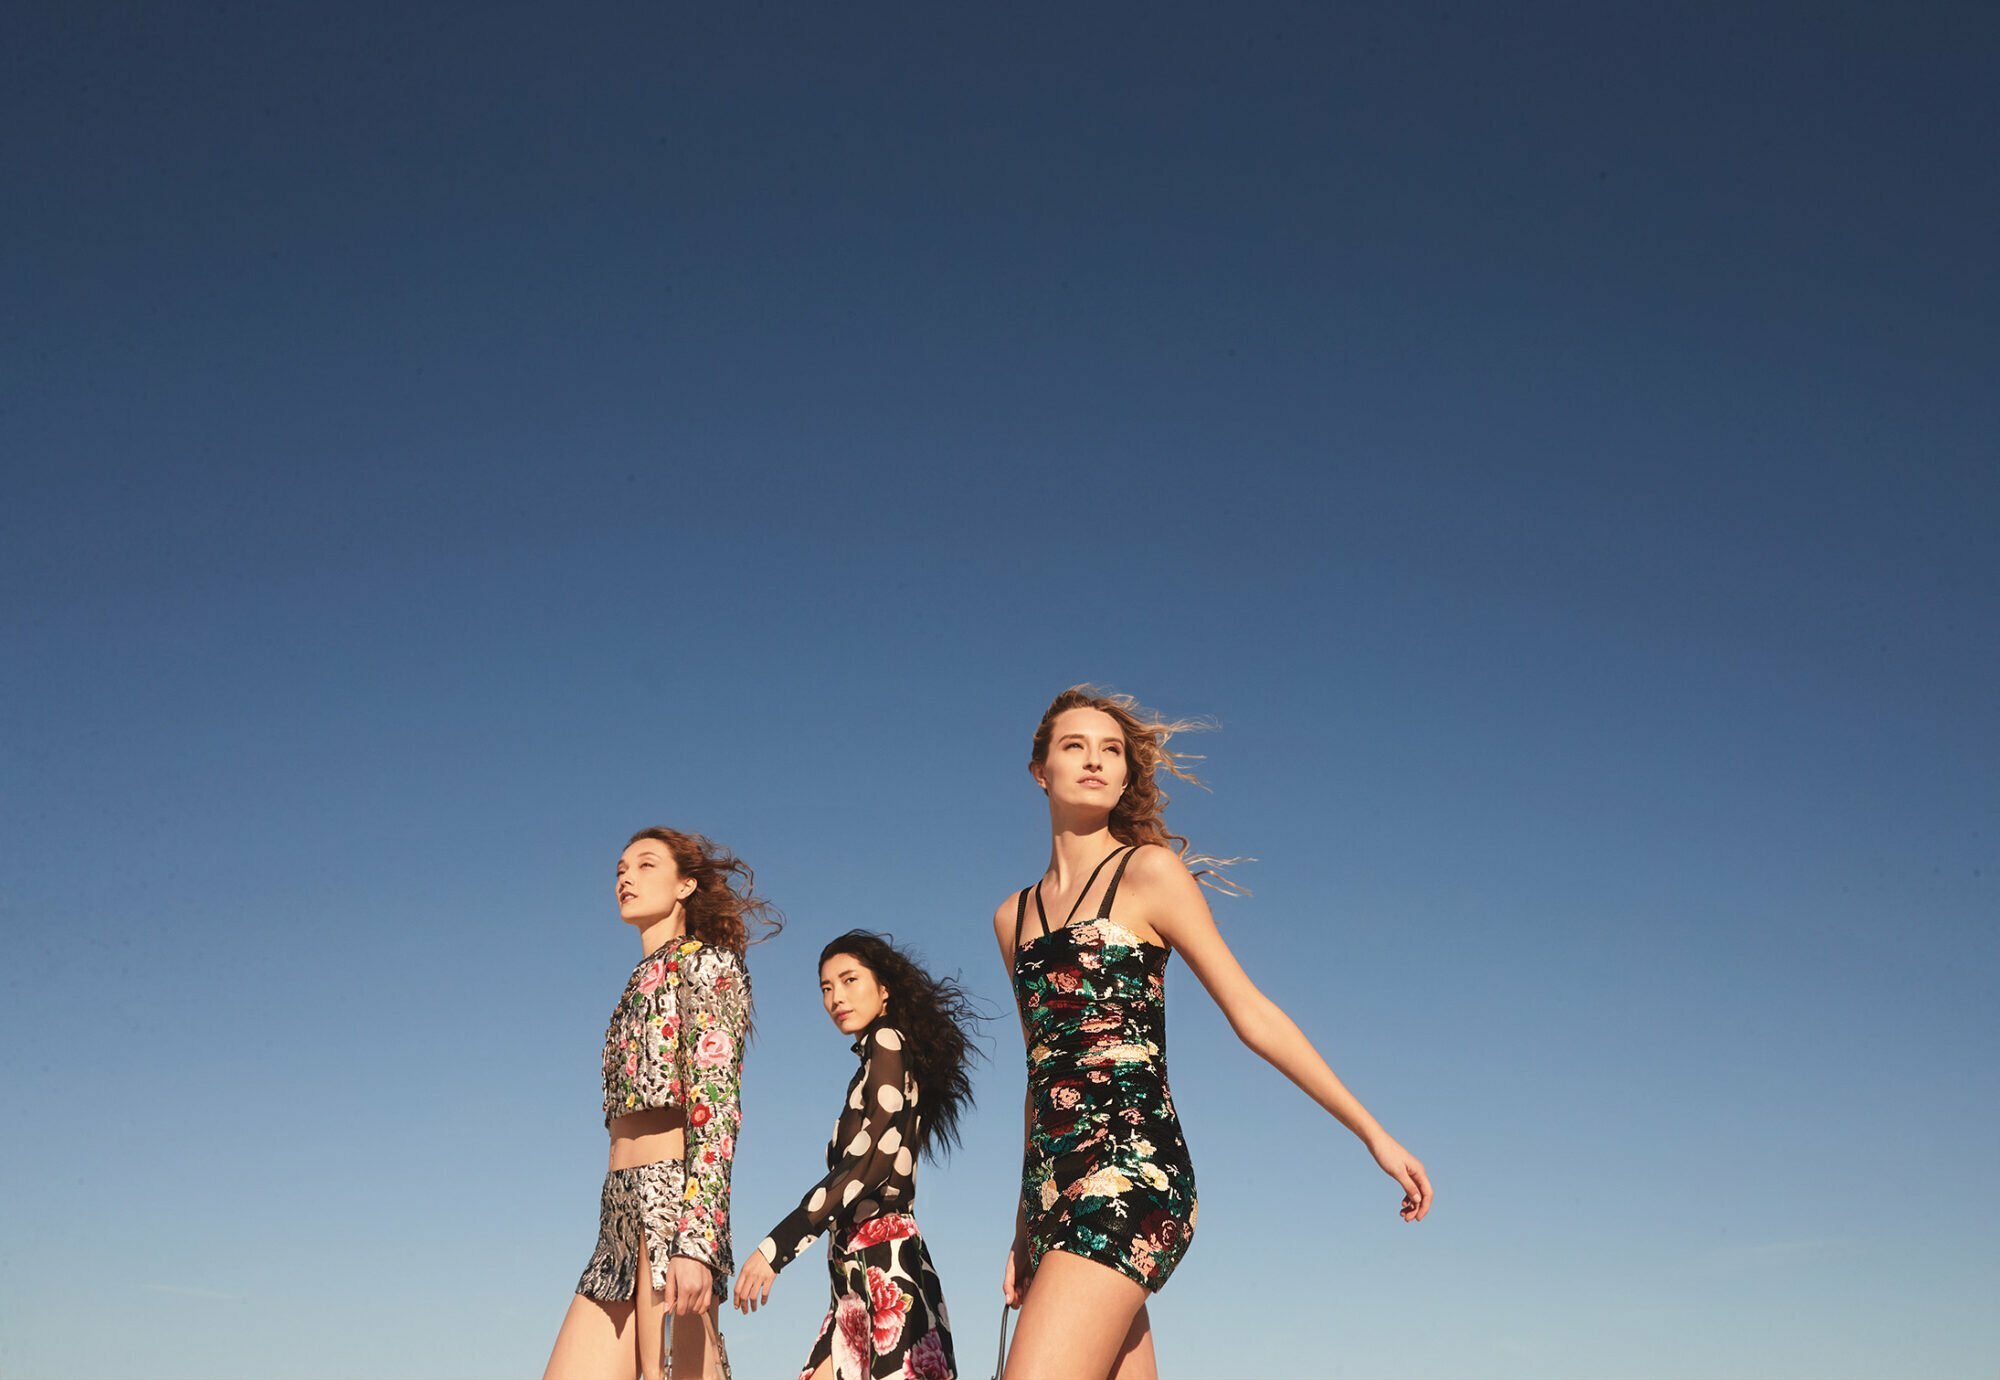 New Spring 2022 Campaign from Neiman Marcus